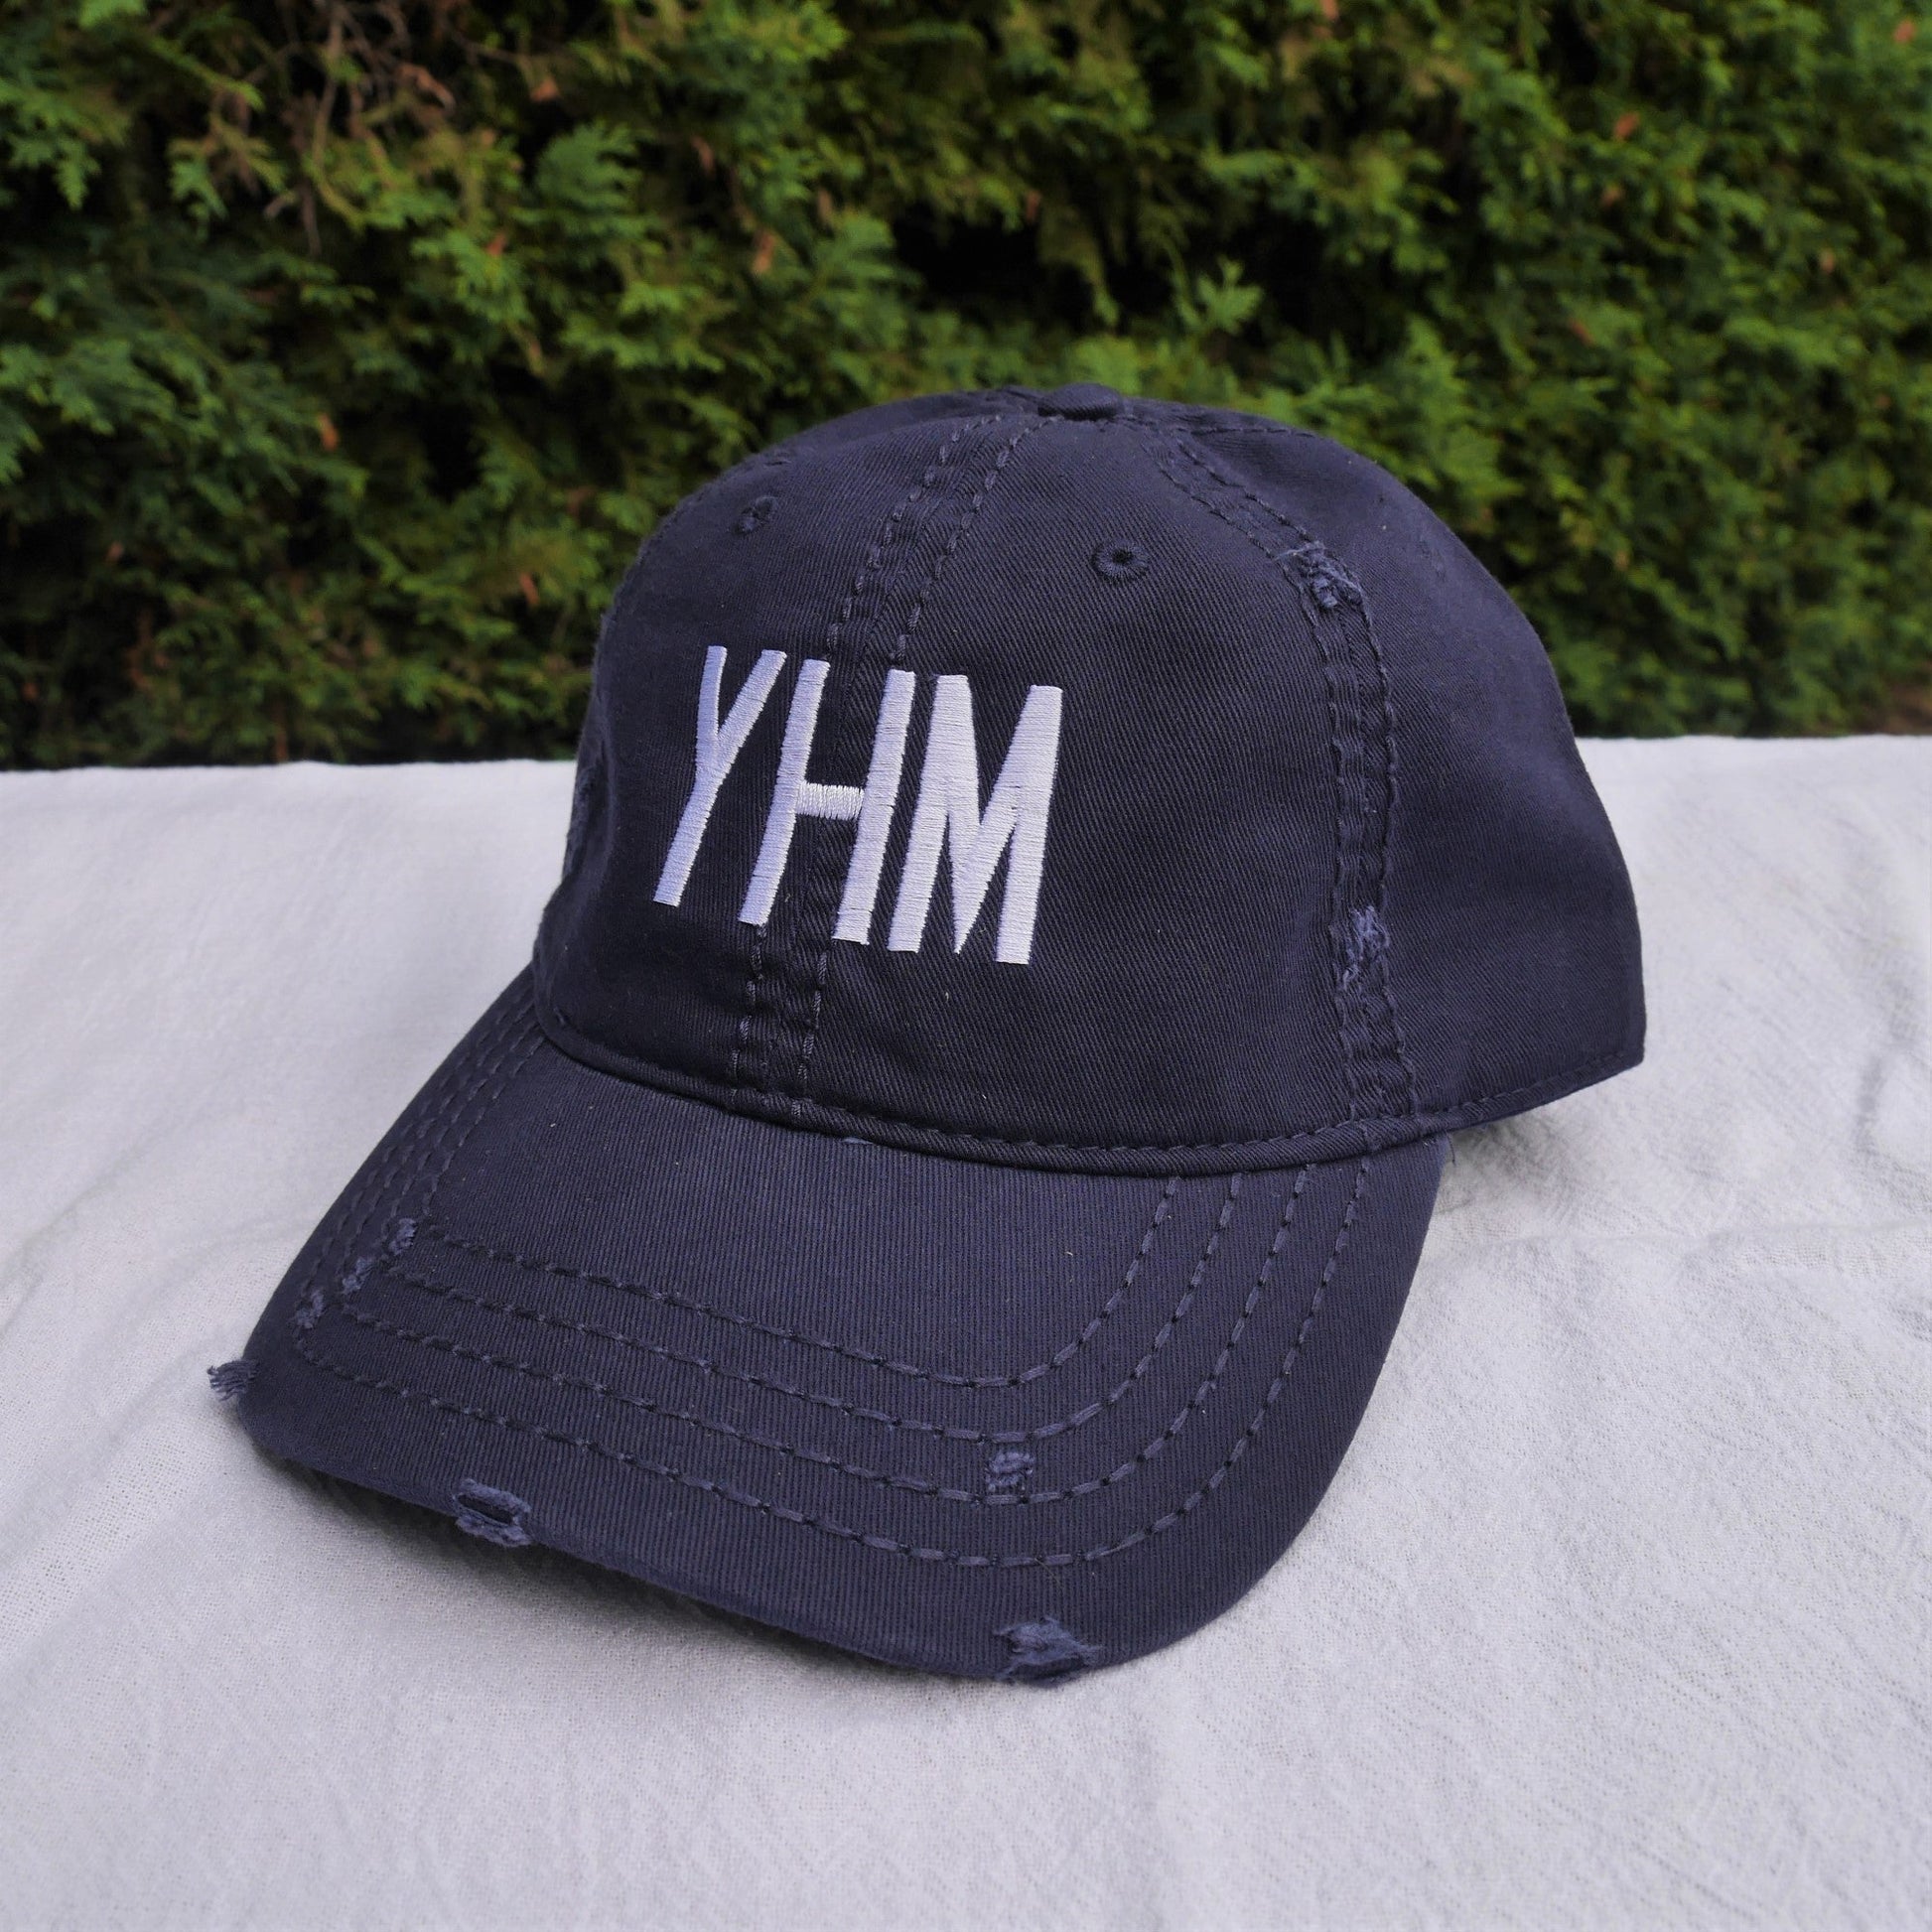 Airport Code Twill Cap - White • OGG Maui • YHM Designs - Image 34